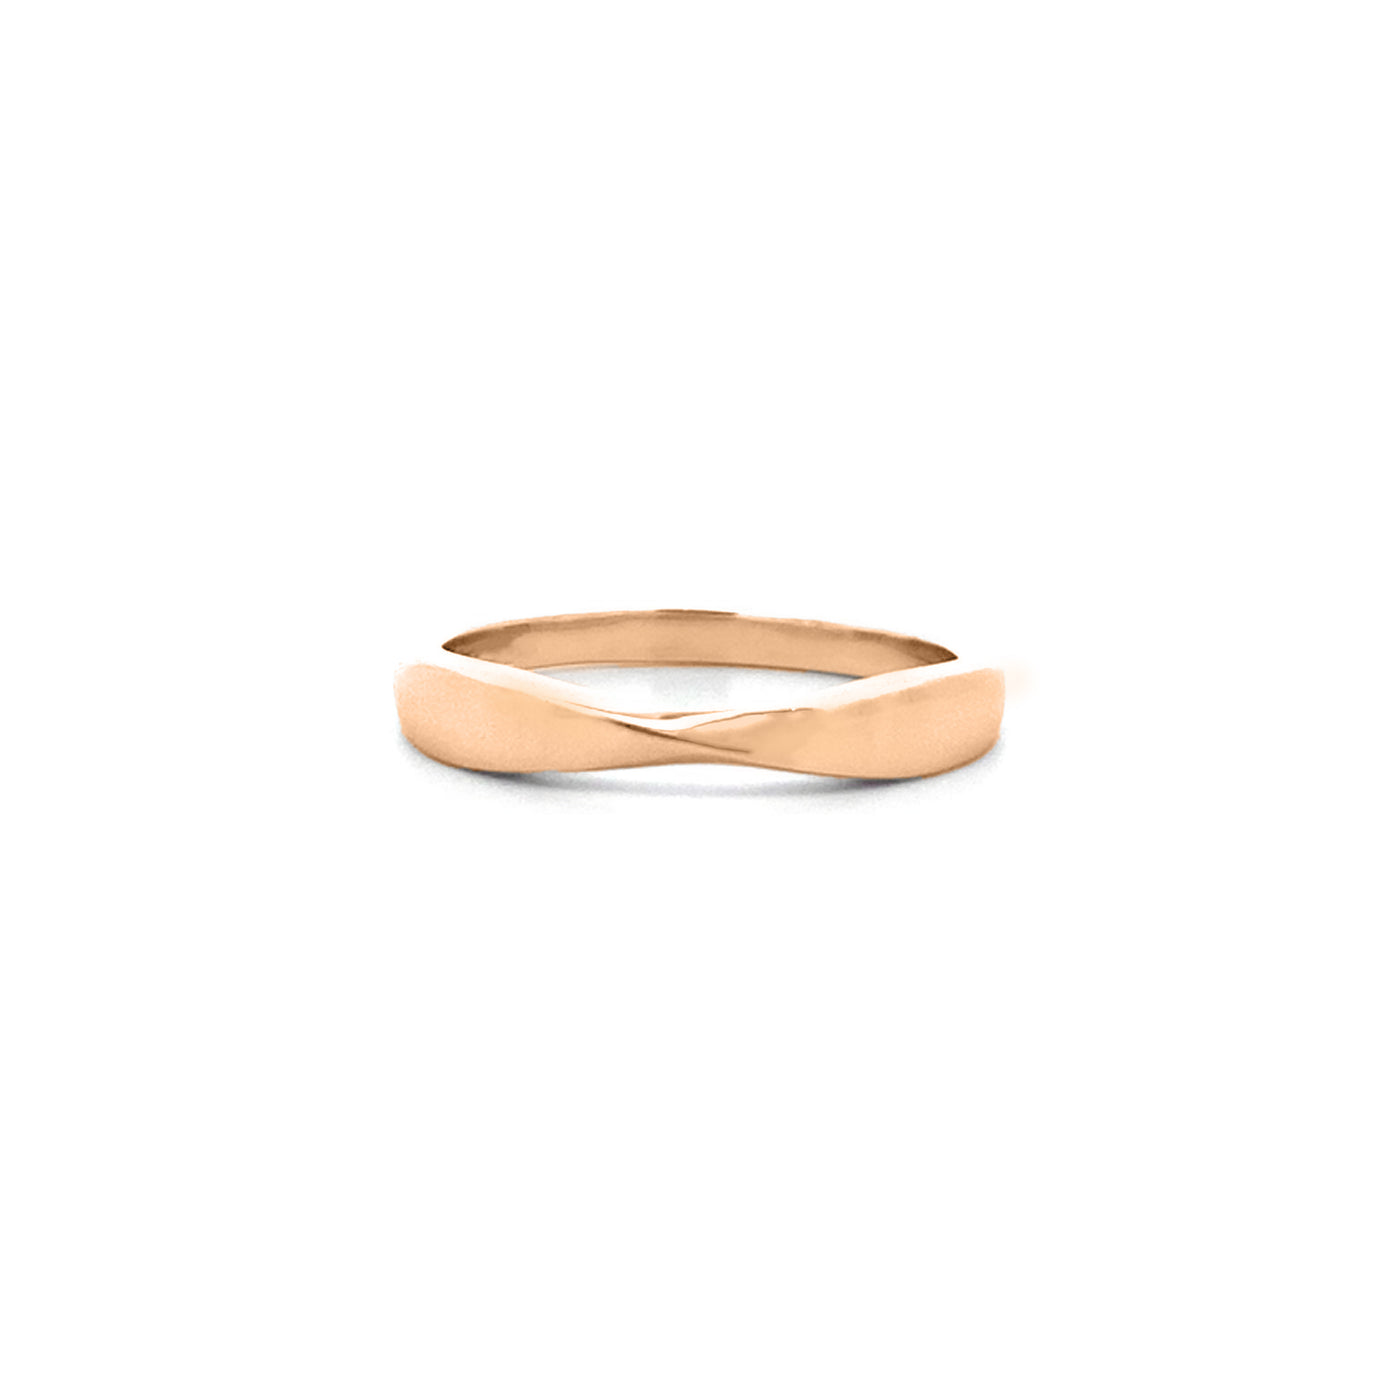 Cinched Ring in Rose Gold